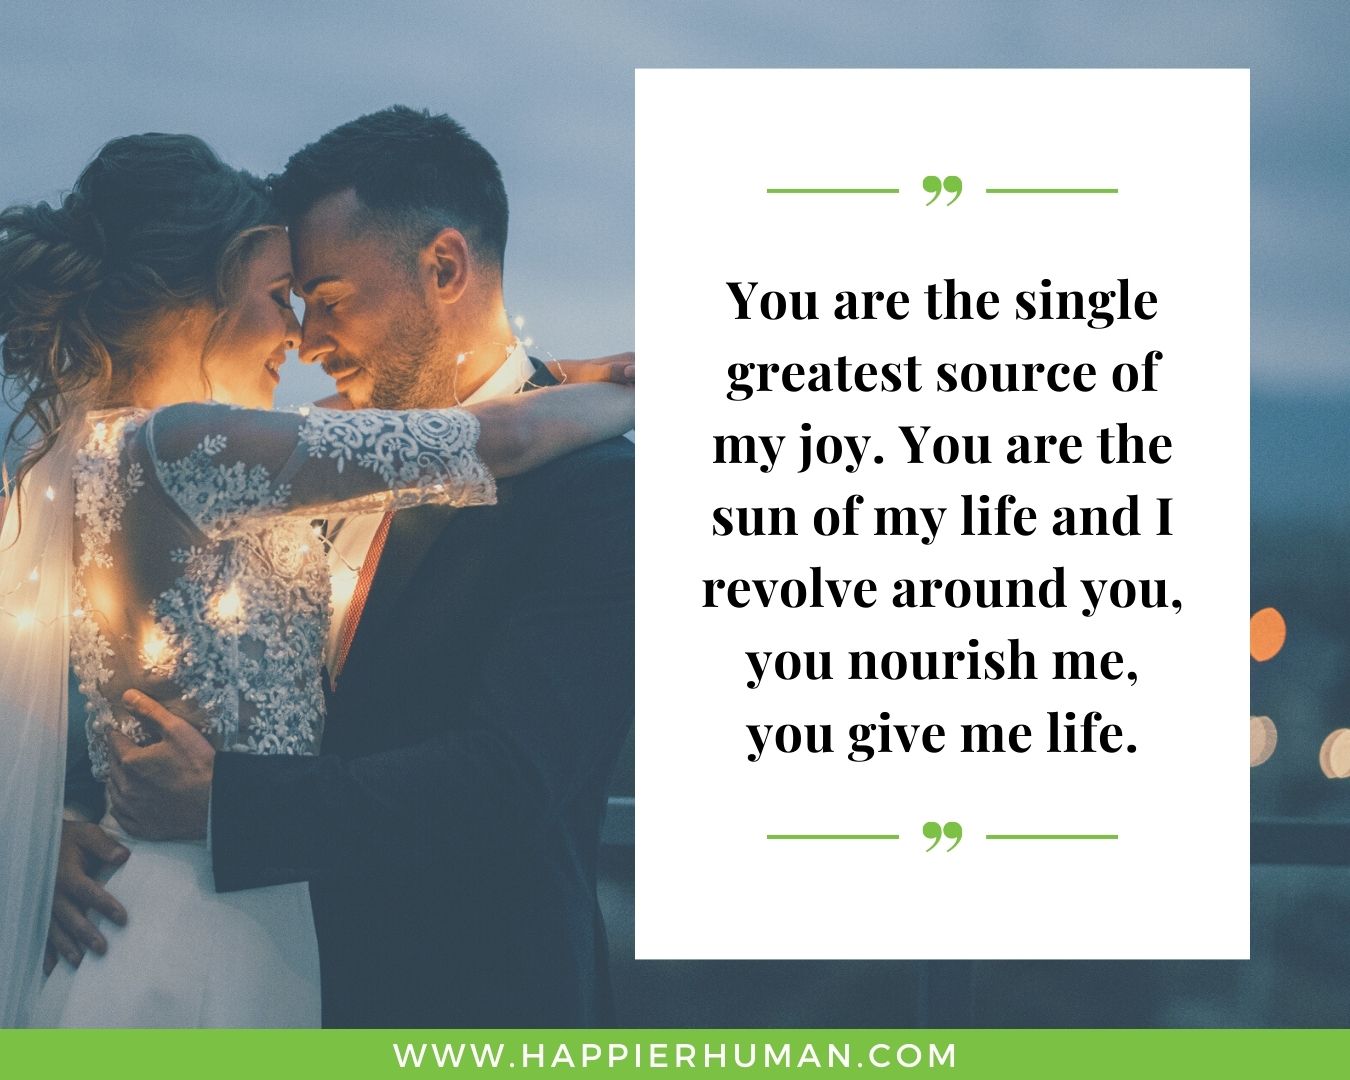 Sweet and Romantic Love Quotes for Her - “You are the single greatest source of my joy. You are the sun of my life and I revolve around you, you nourish me, you give me life.”